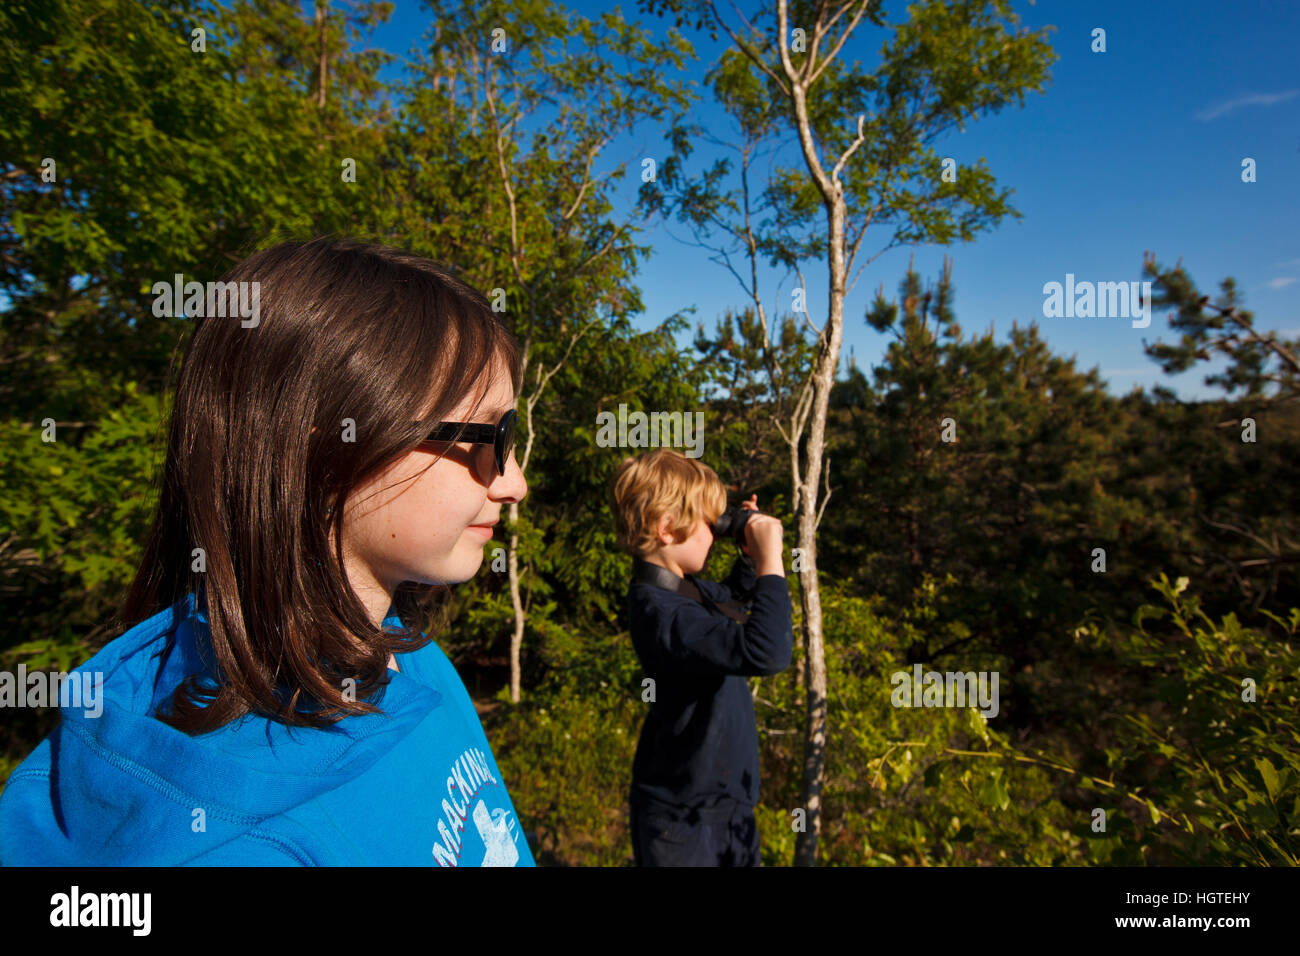 A young boy and girl take in the view from the Biddle Property in Wellfleet, Massachusetts. Cape Cod National Seacshore. Stock Photo